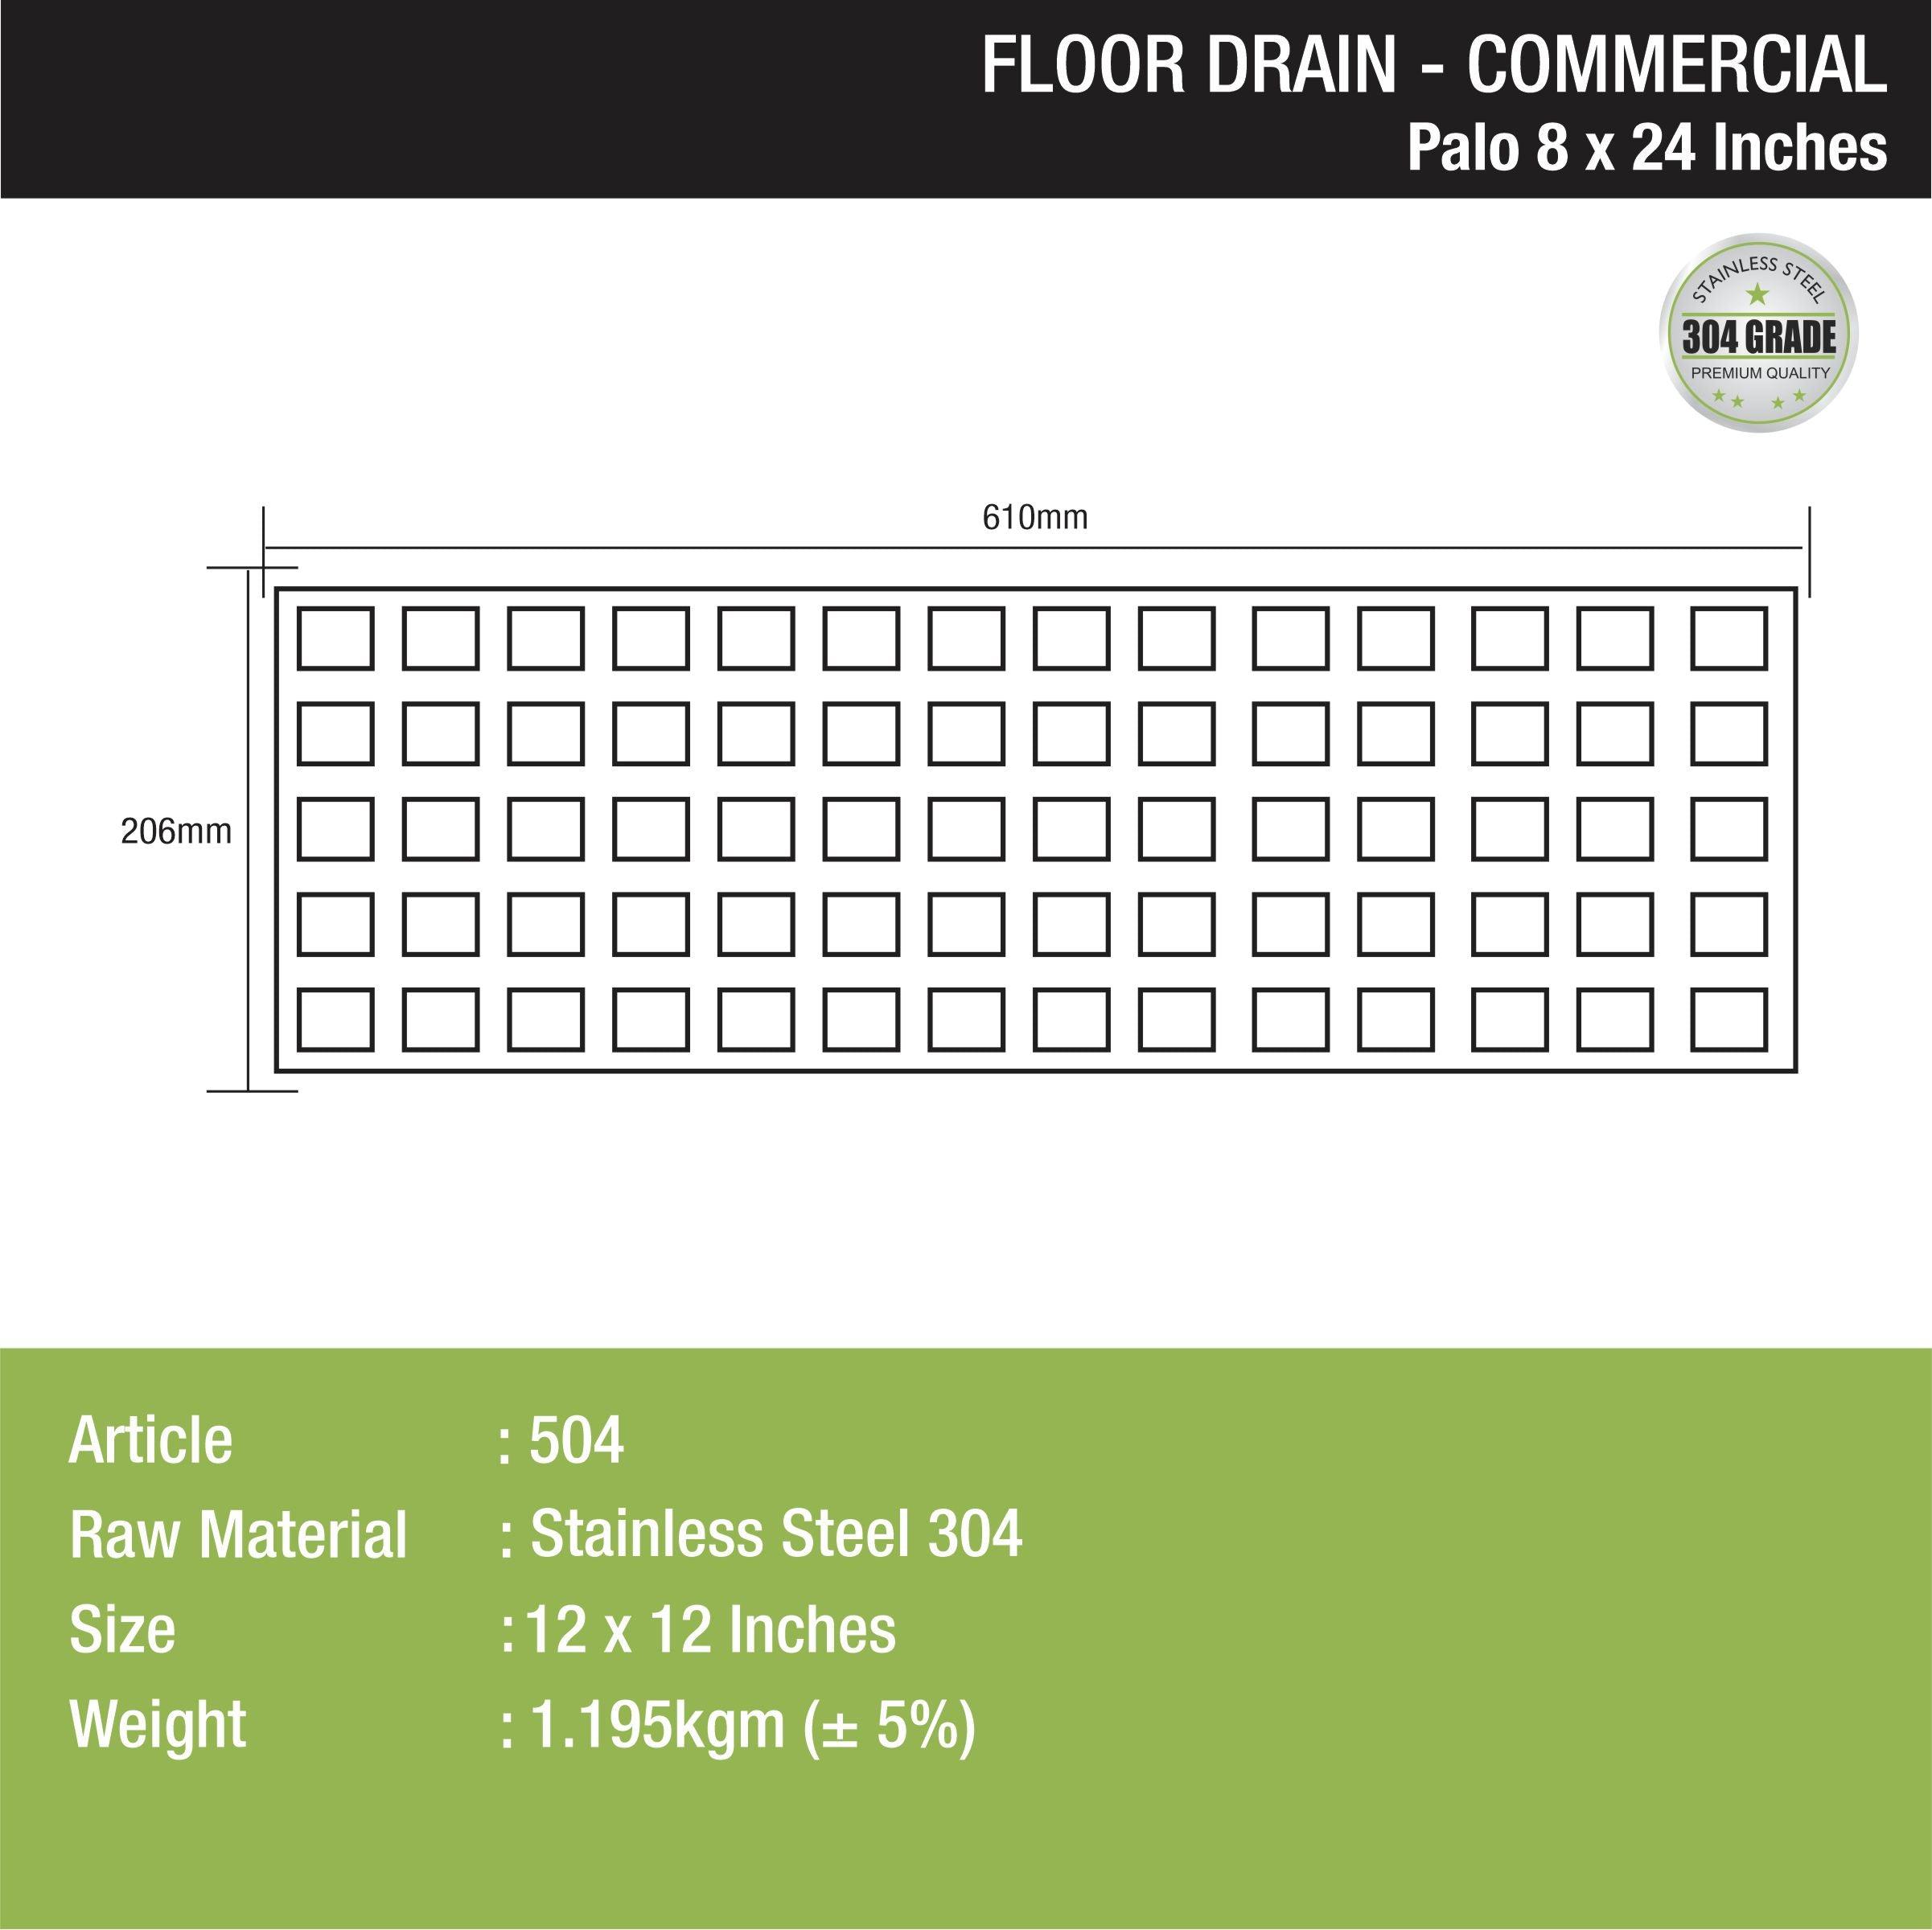 Palo Commercial Floor Drain (8 x 24 Inches) dimensions and sizes